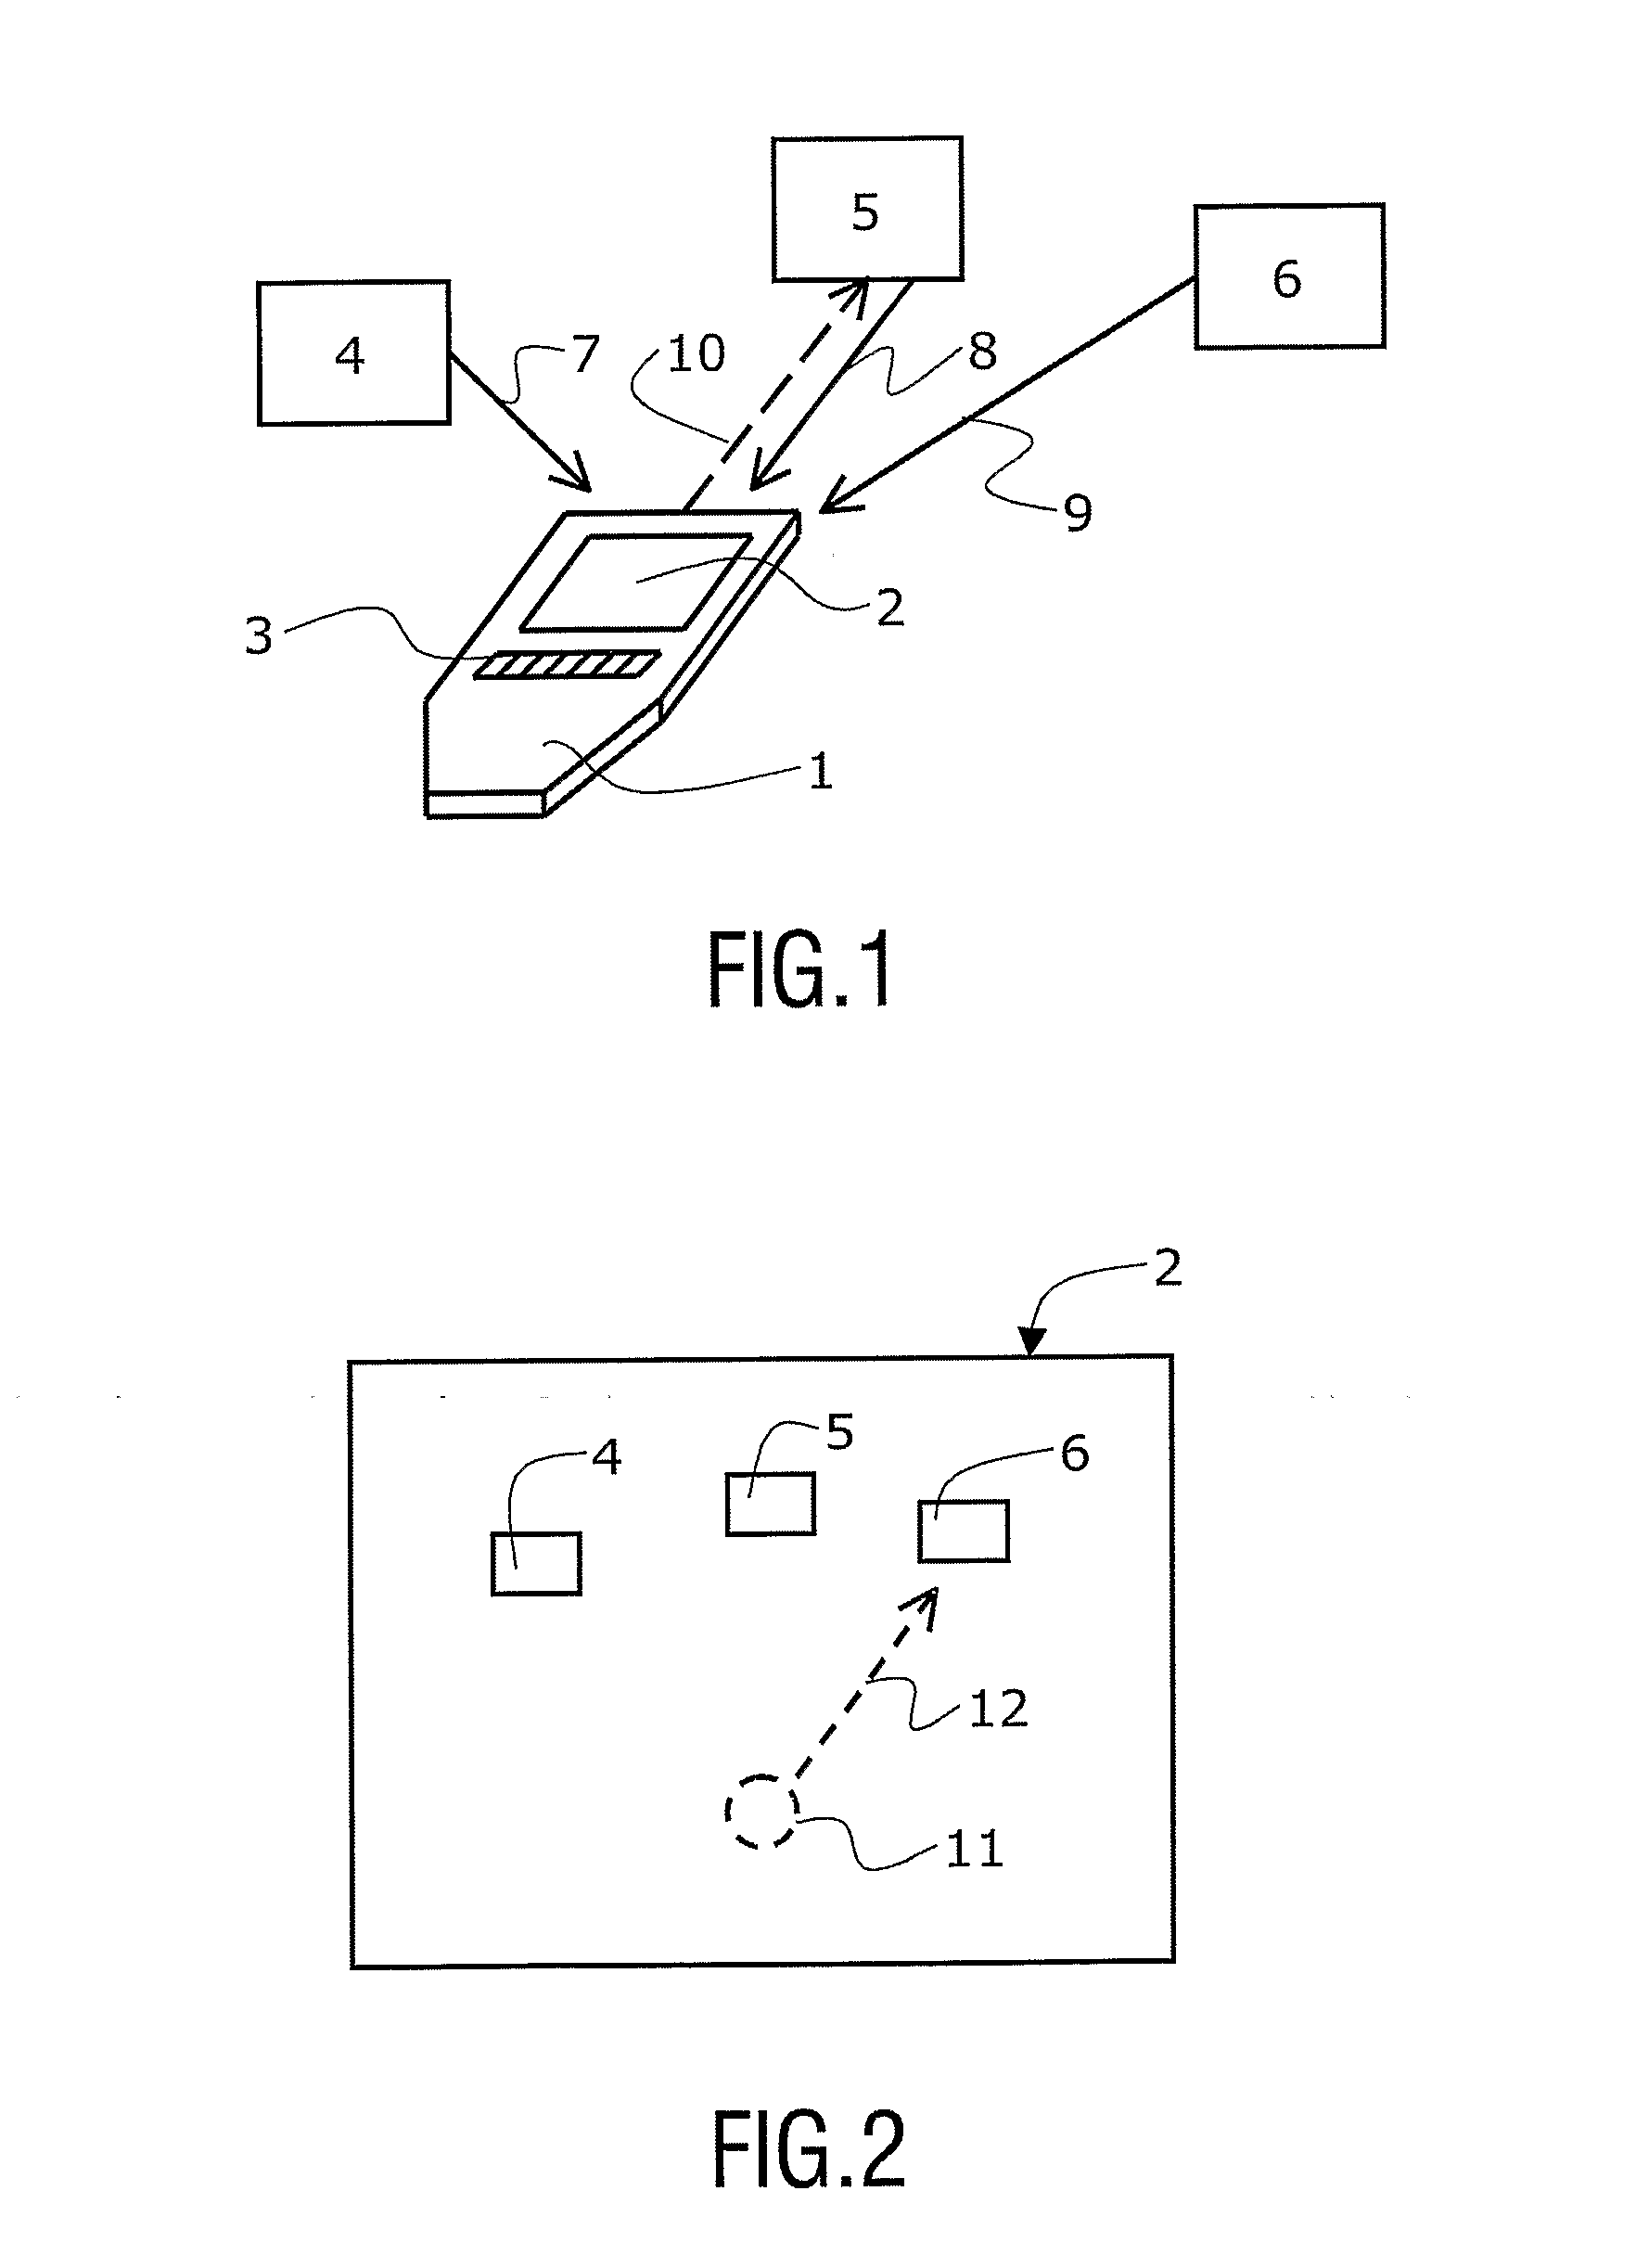 Spatial Interaction System